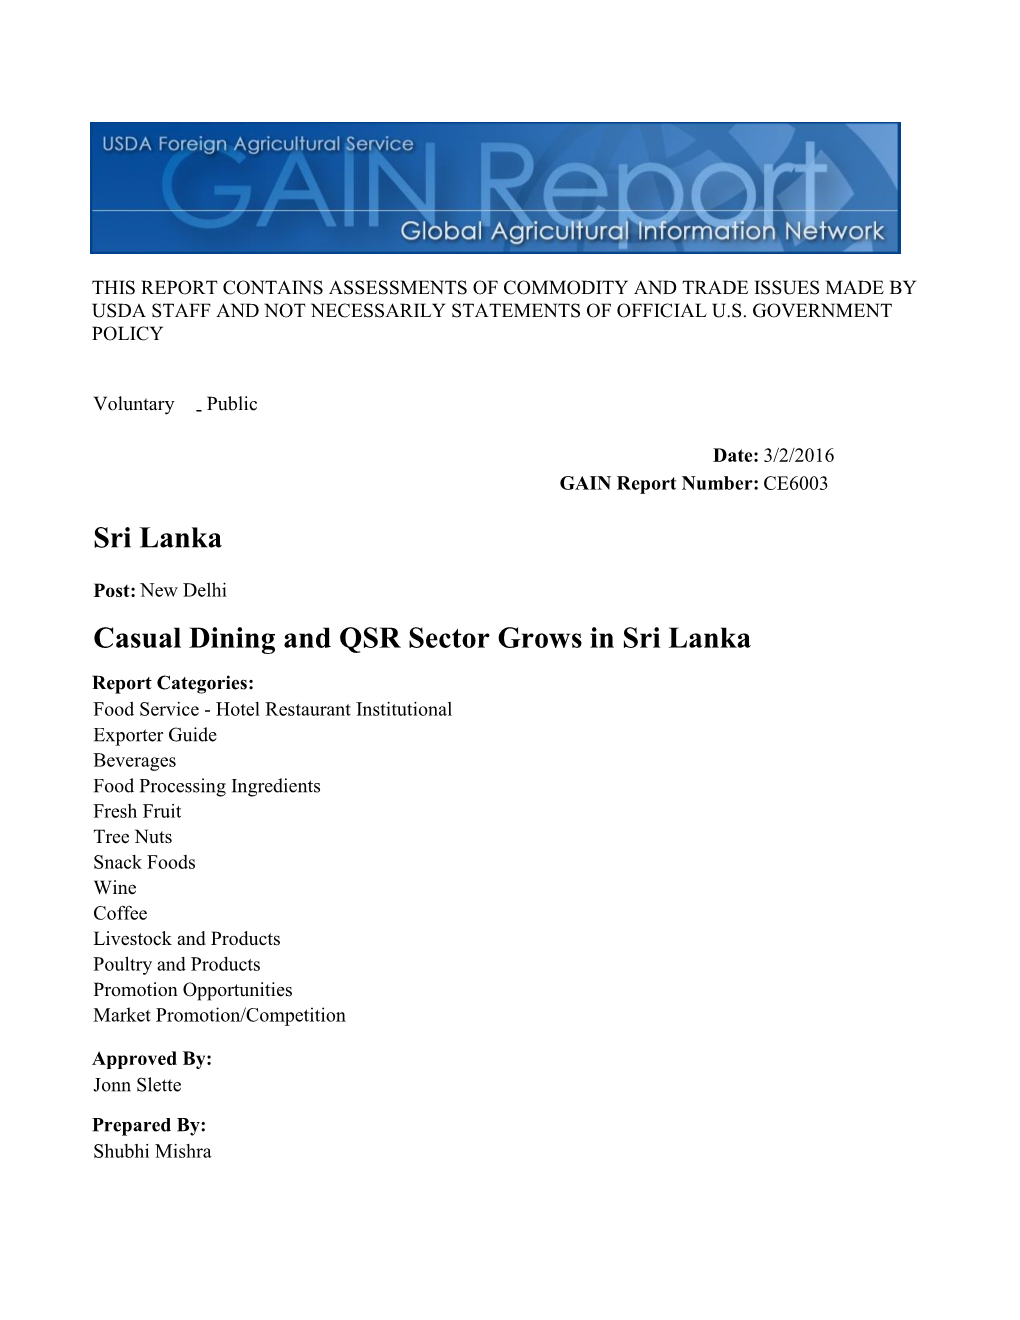 Casual Dining and QSR Sector Grows in Sri Lanka